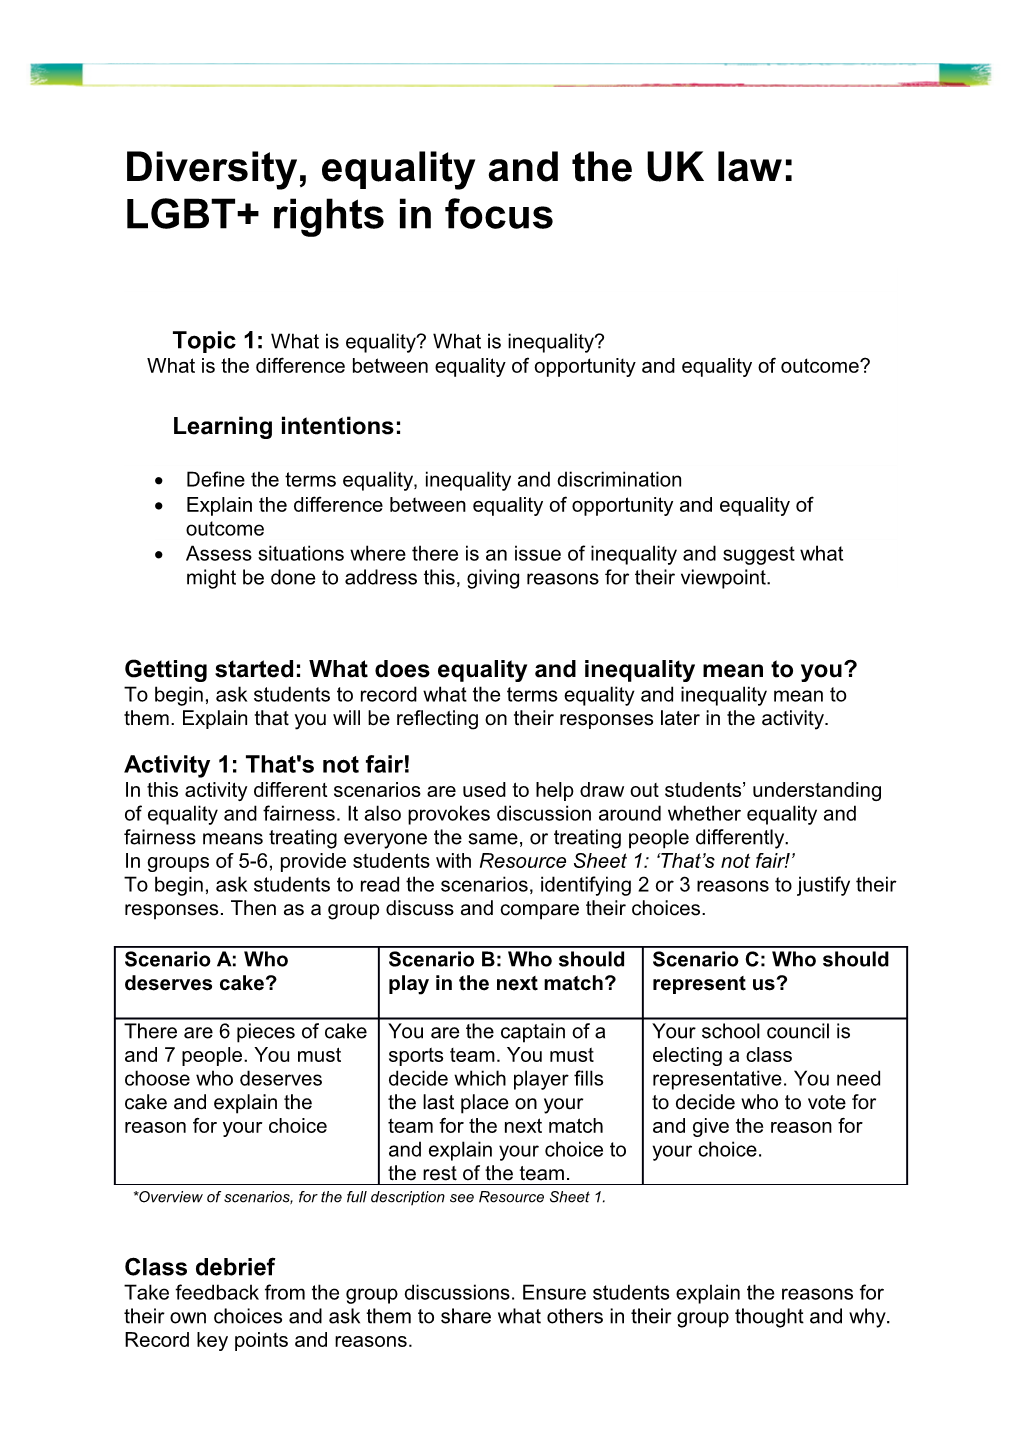 Diversity, Equality and the UK Law: LGBT+ Rights in Focus